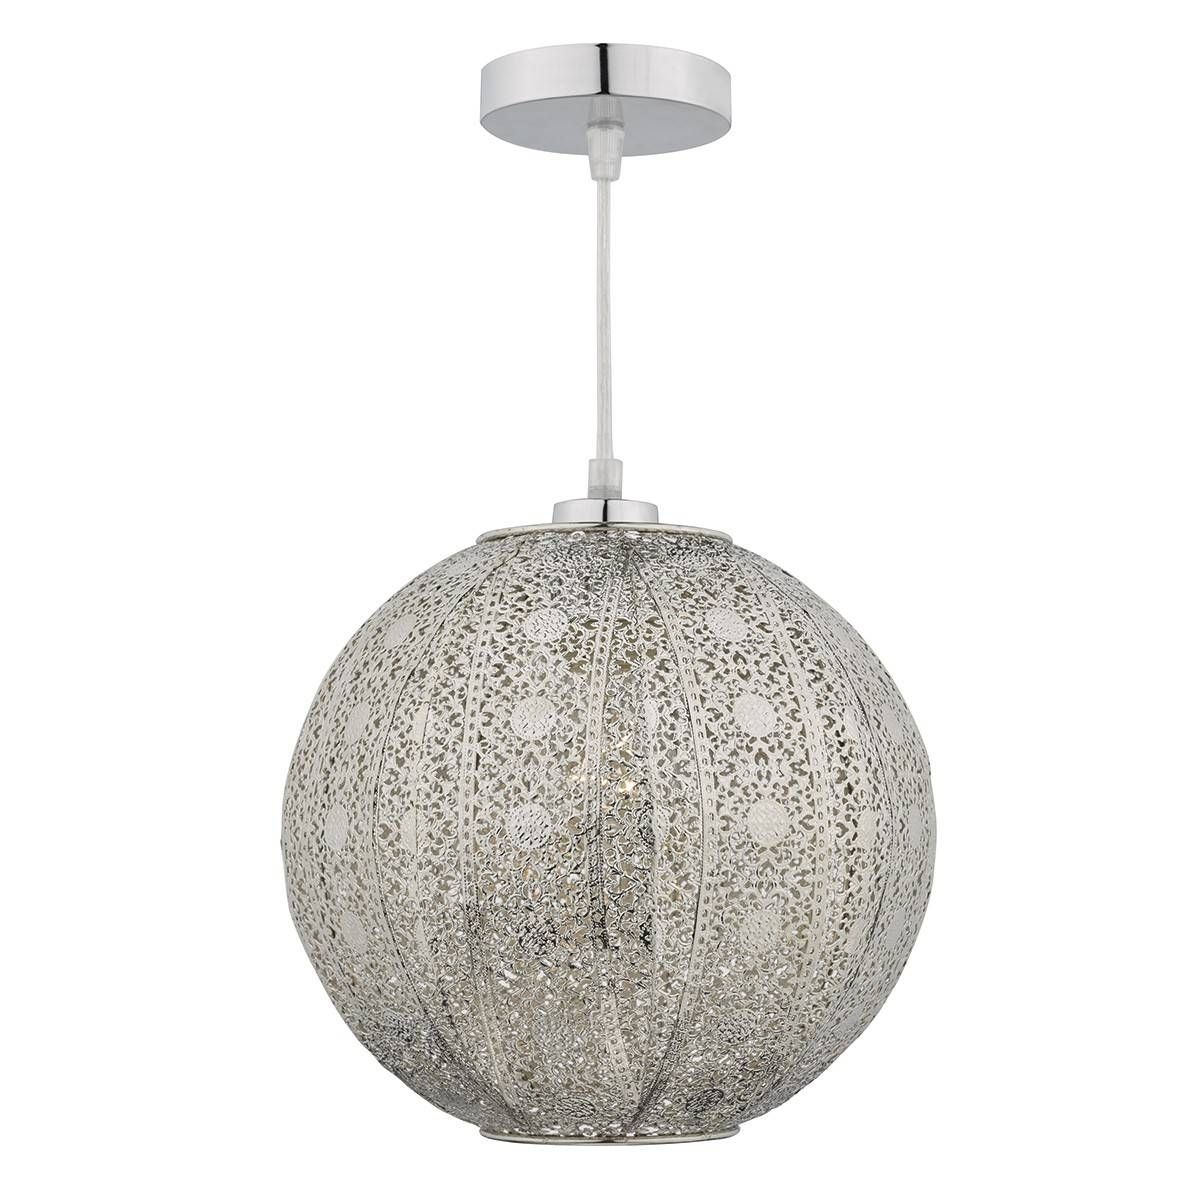 Bazar Filigree Style Globe Pendant Antique Silver With Regard To Easy Fit Pendant Lights (View 14 of 15)